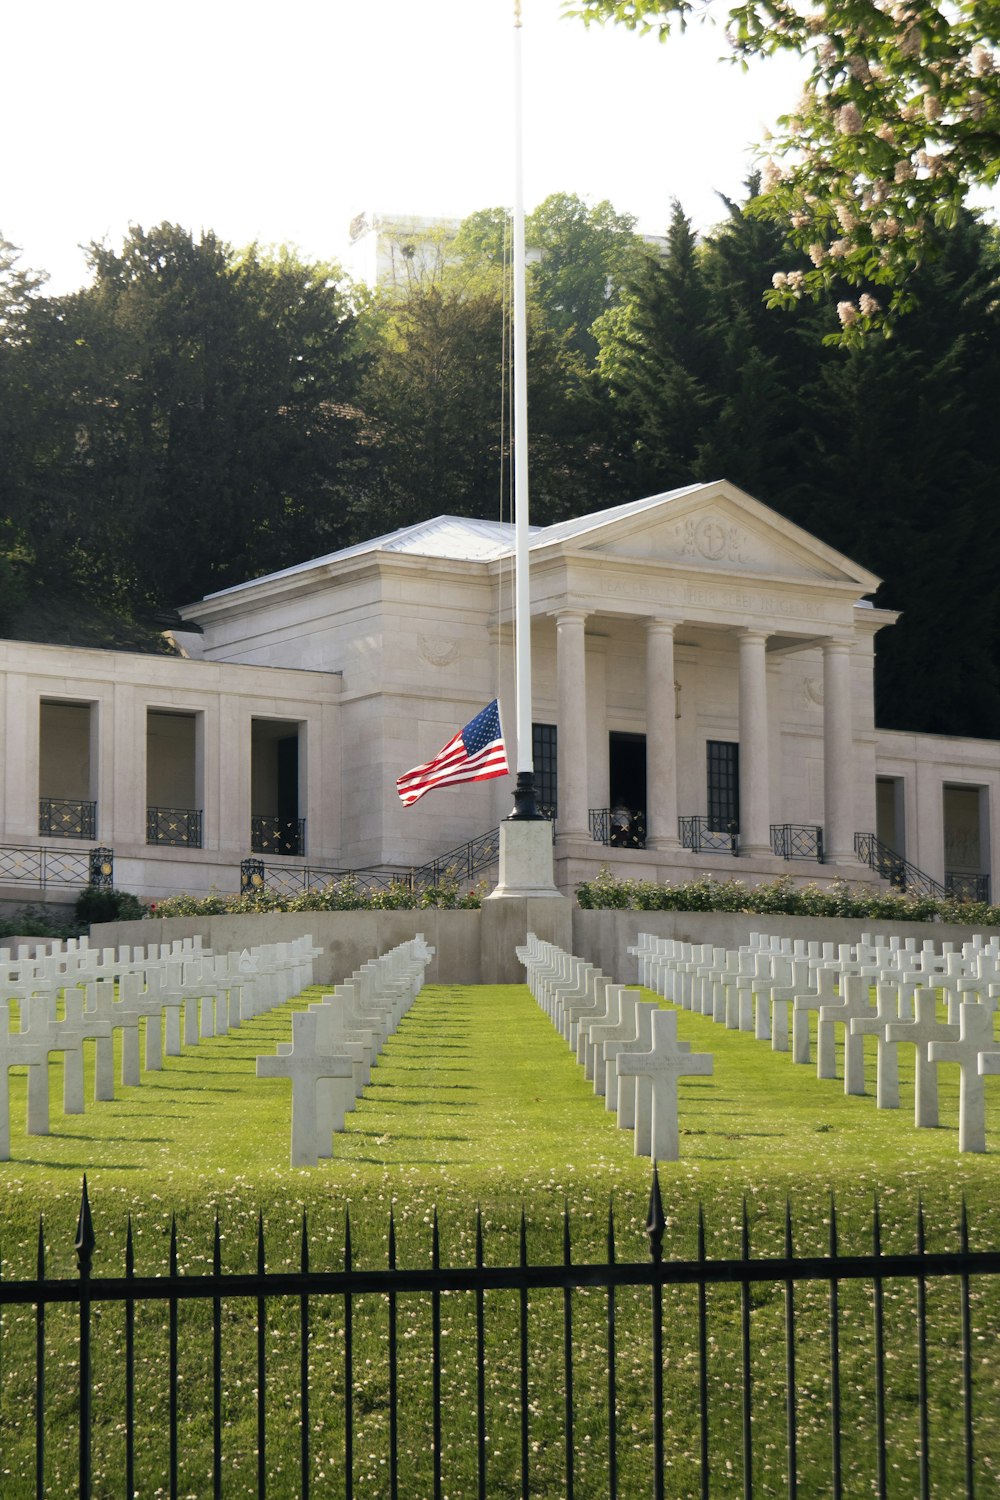 the american flag is flying over a cemetery